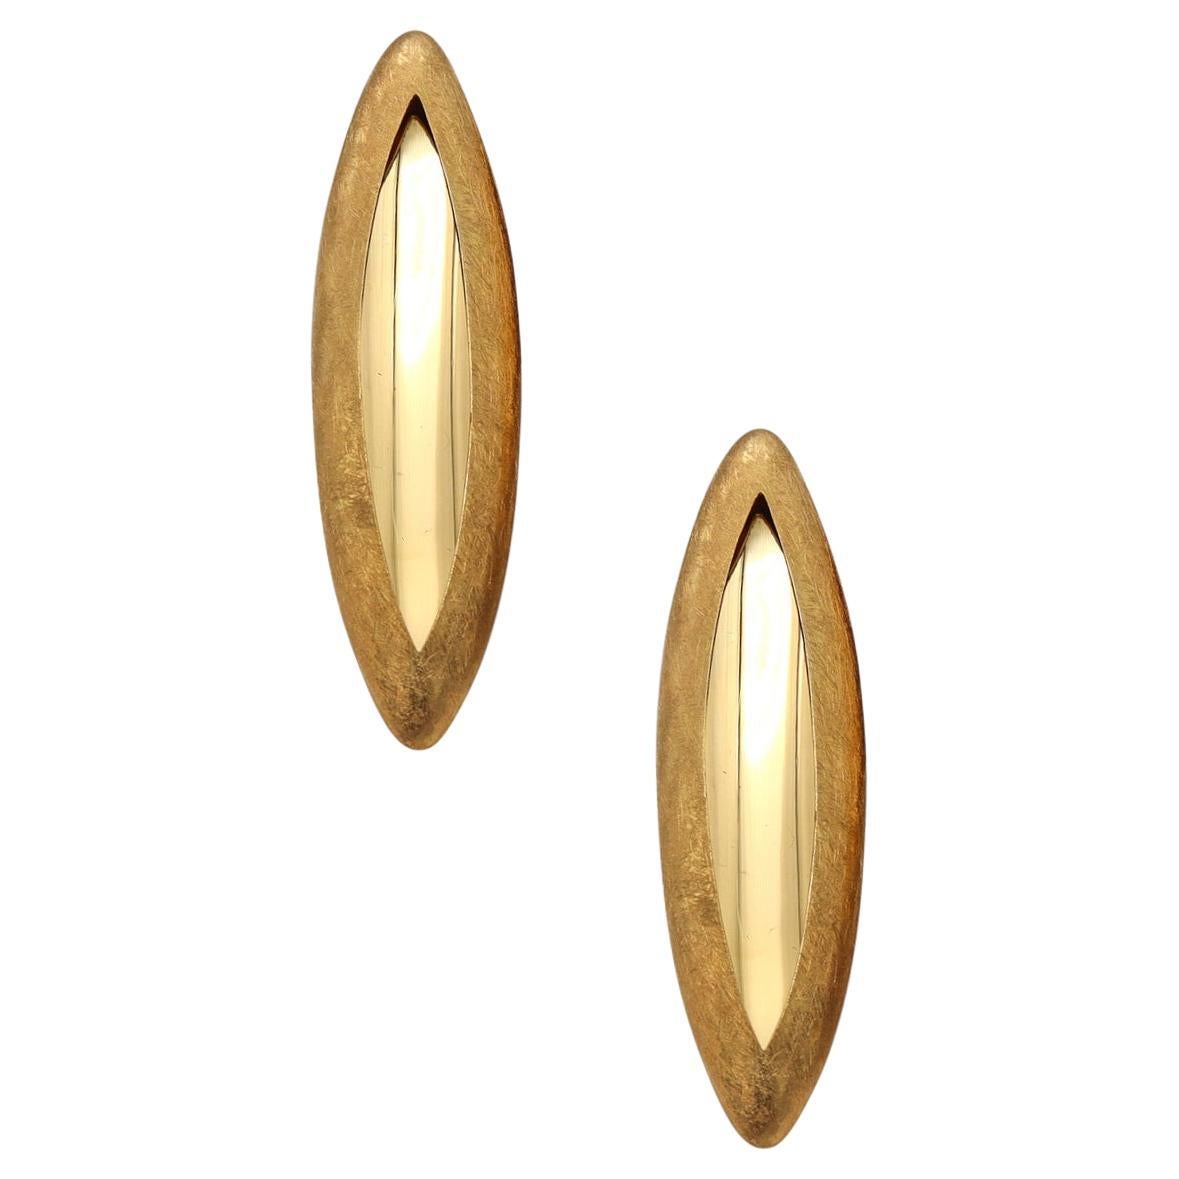 Anish Kapoor 2010 London Rare Pair of Sculptural Torpedo Earrings in 18Kt Gold For Sale